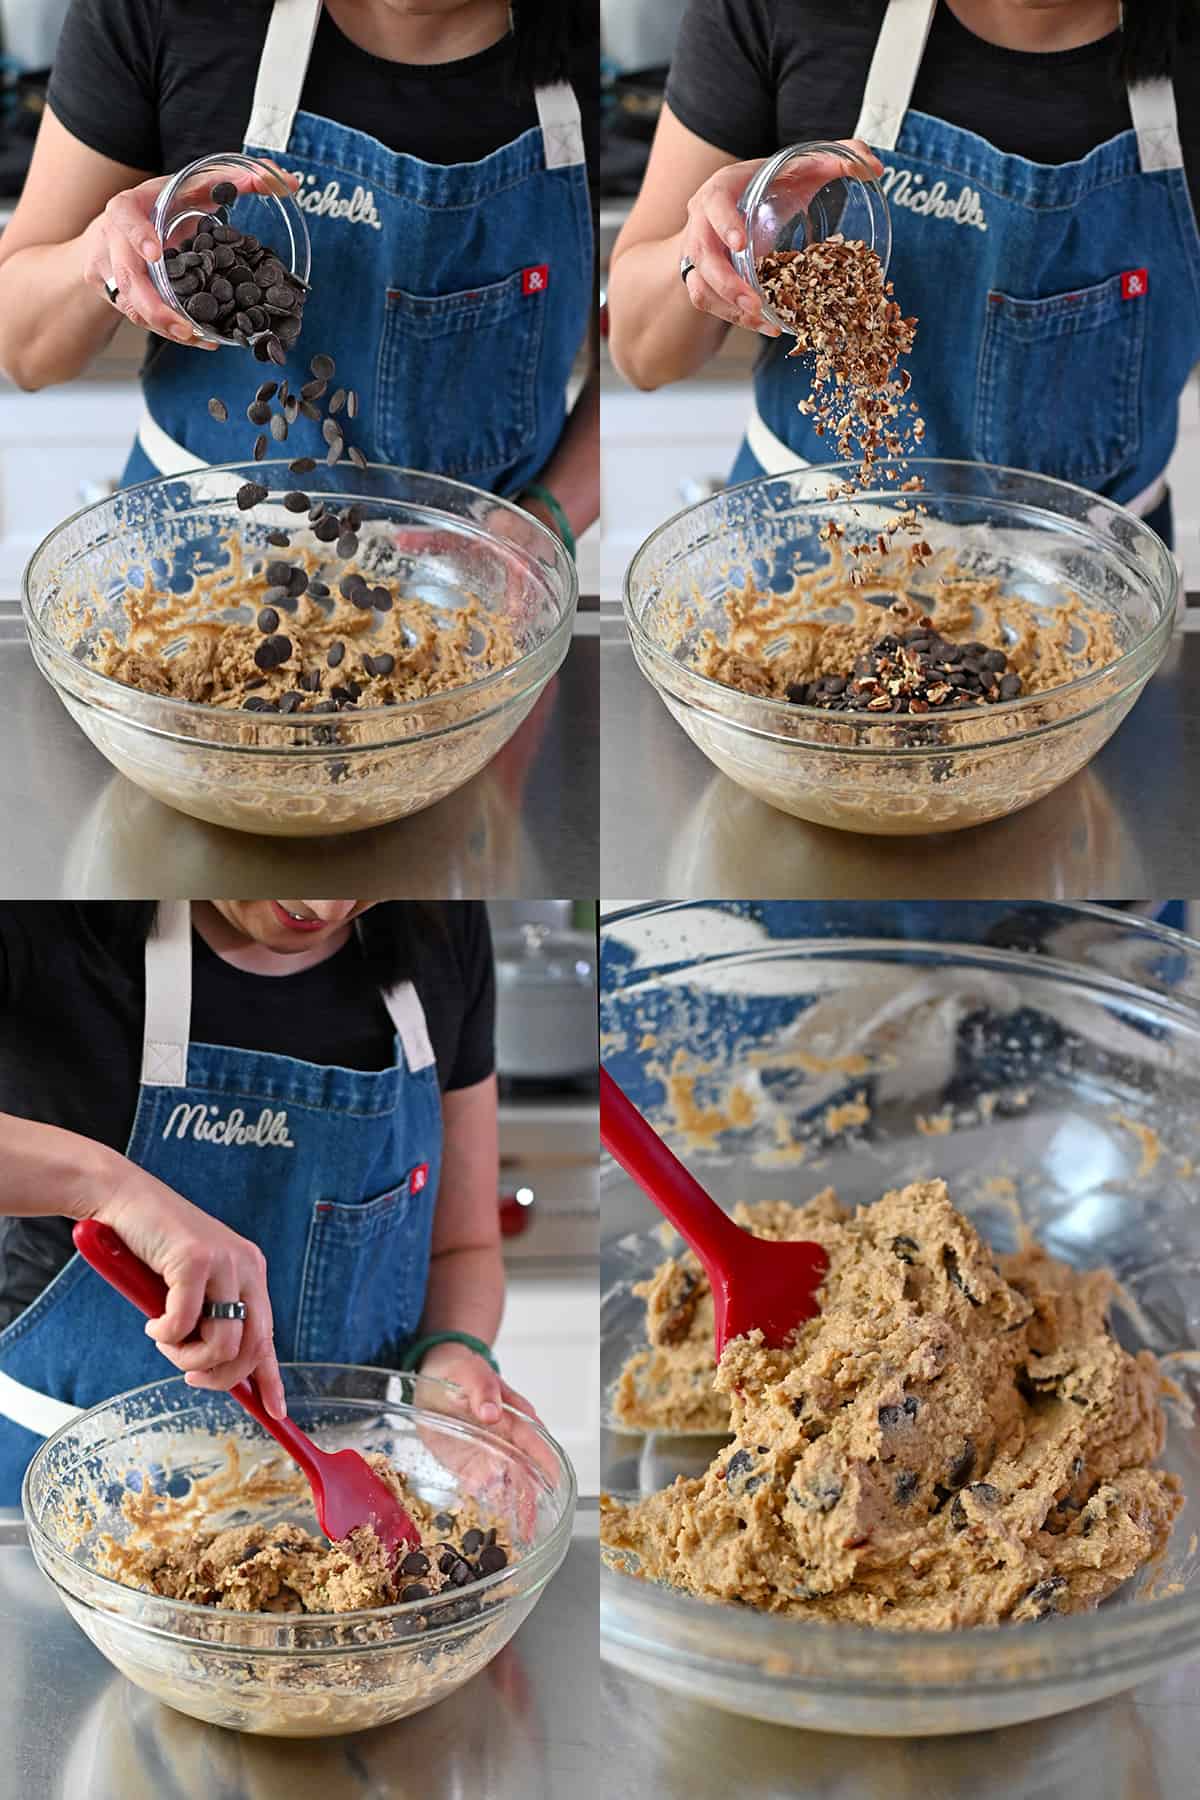 Four sequential photos showing someone adding chocolate chips and chopped nuts to a bowl full of banana cookie batter and mixing it all together with a red silicone spatula.